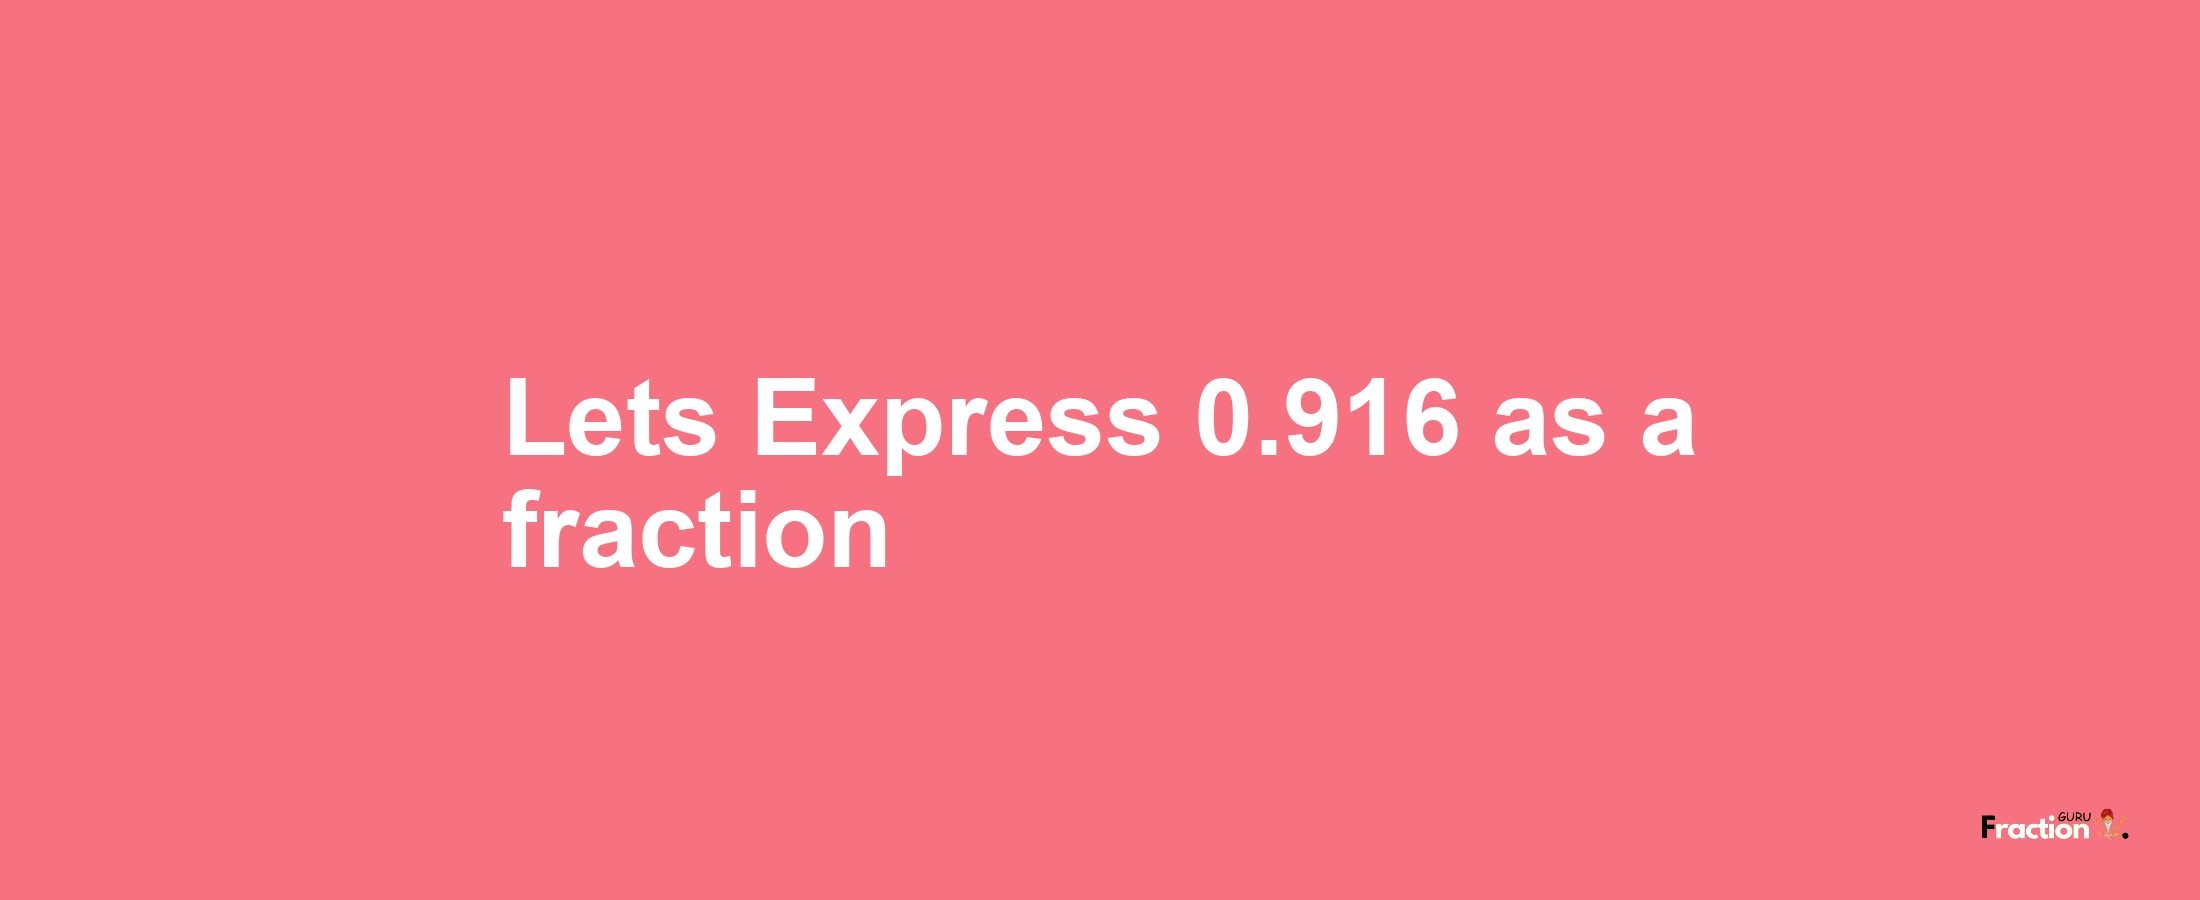 Lets Express 0.916 as afraction